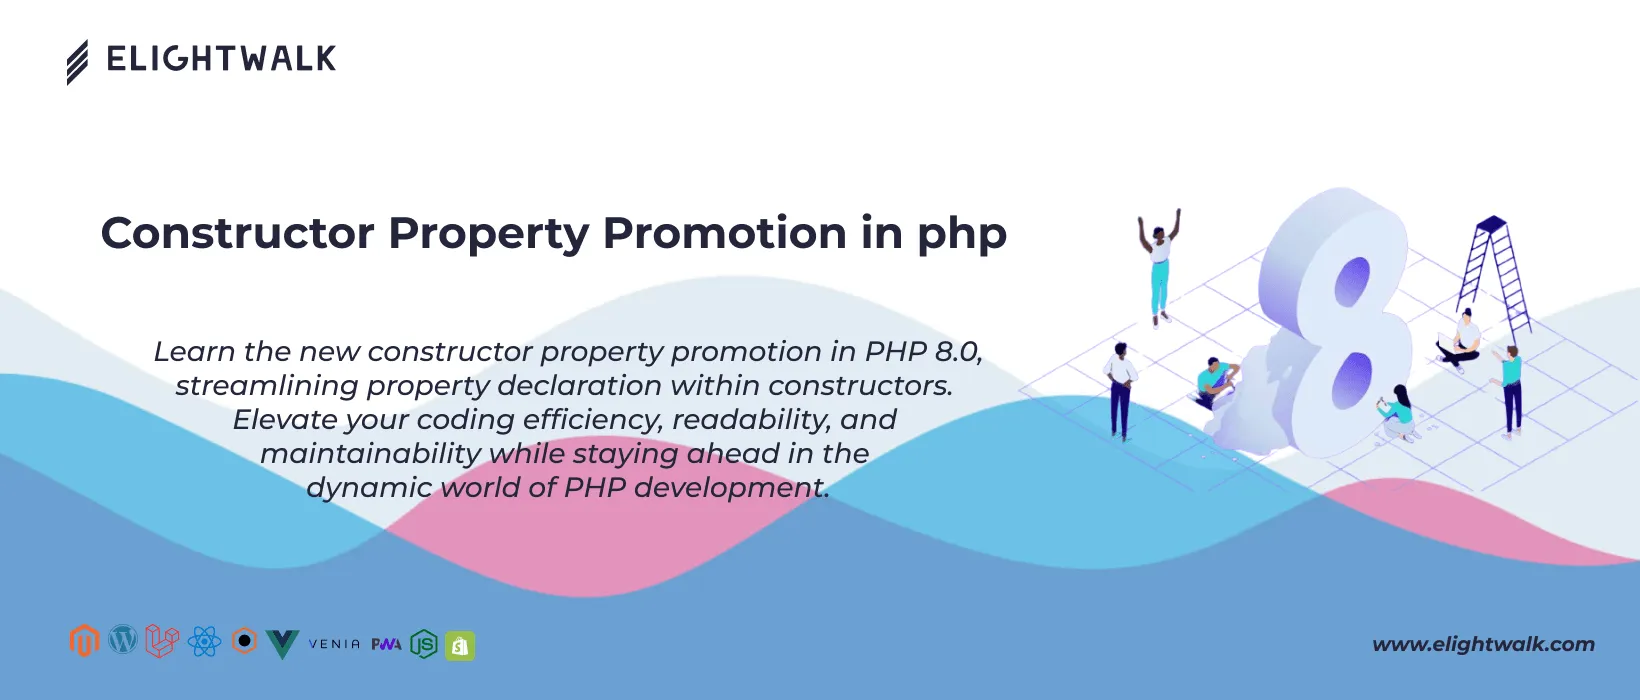 Constructor property promotion in PHP 8